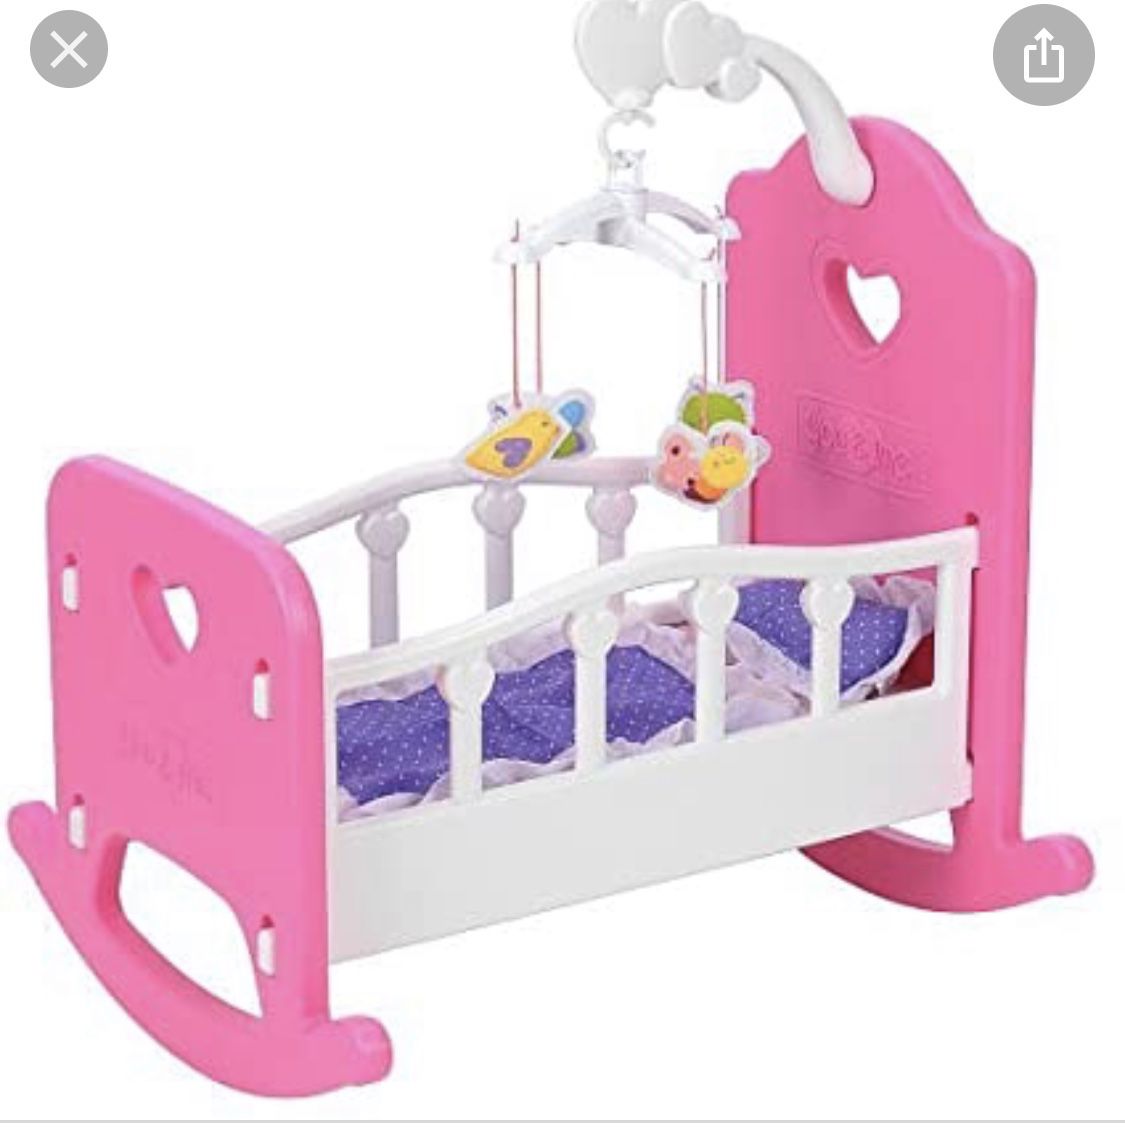 You and me baby doll rocking bed